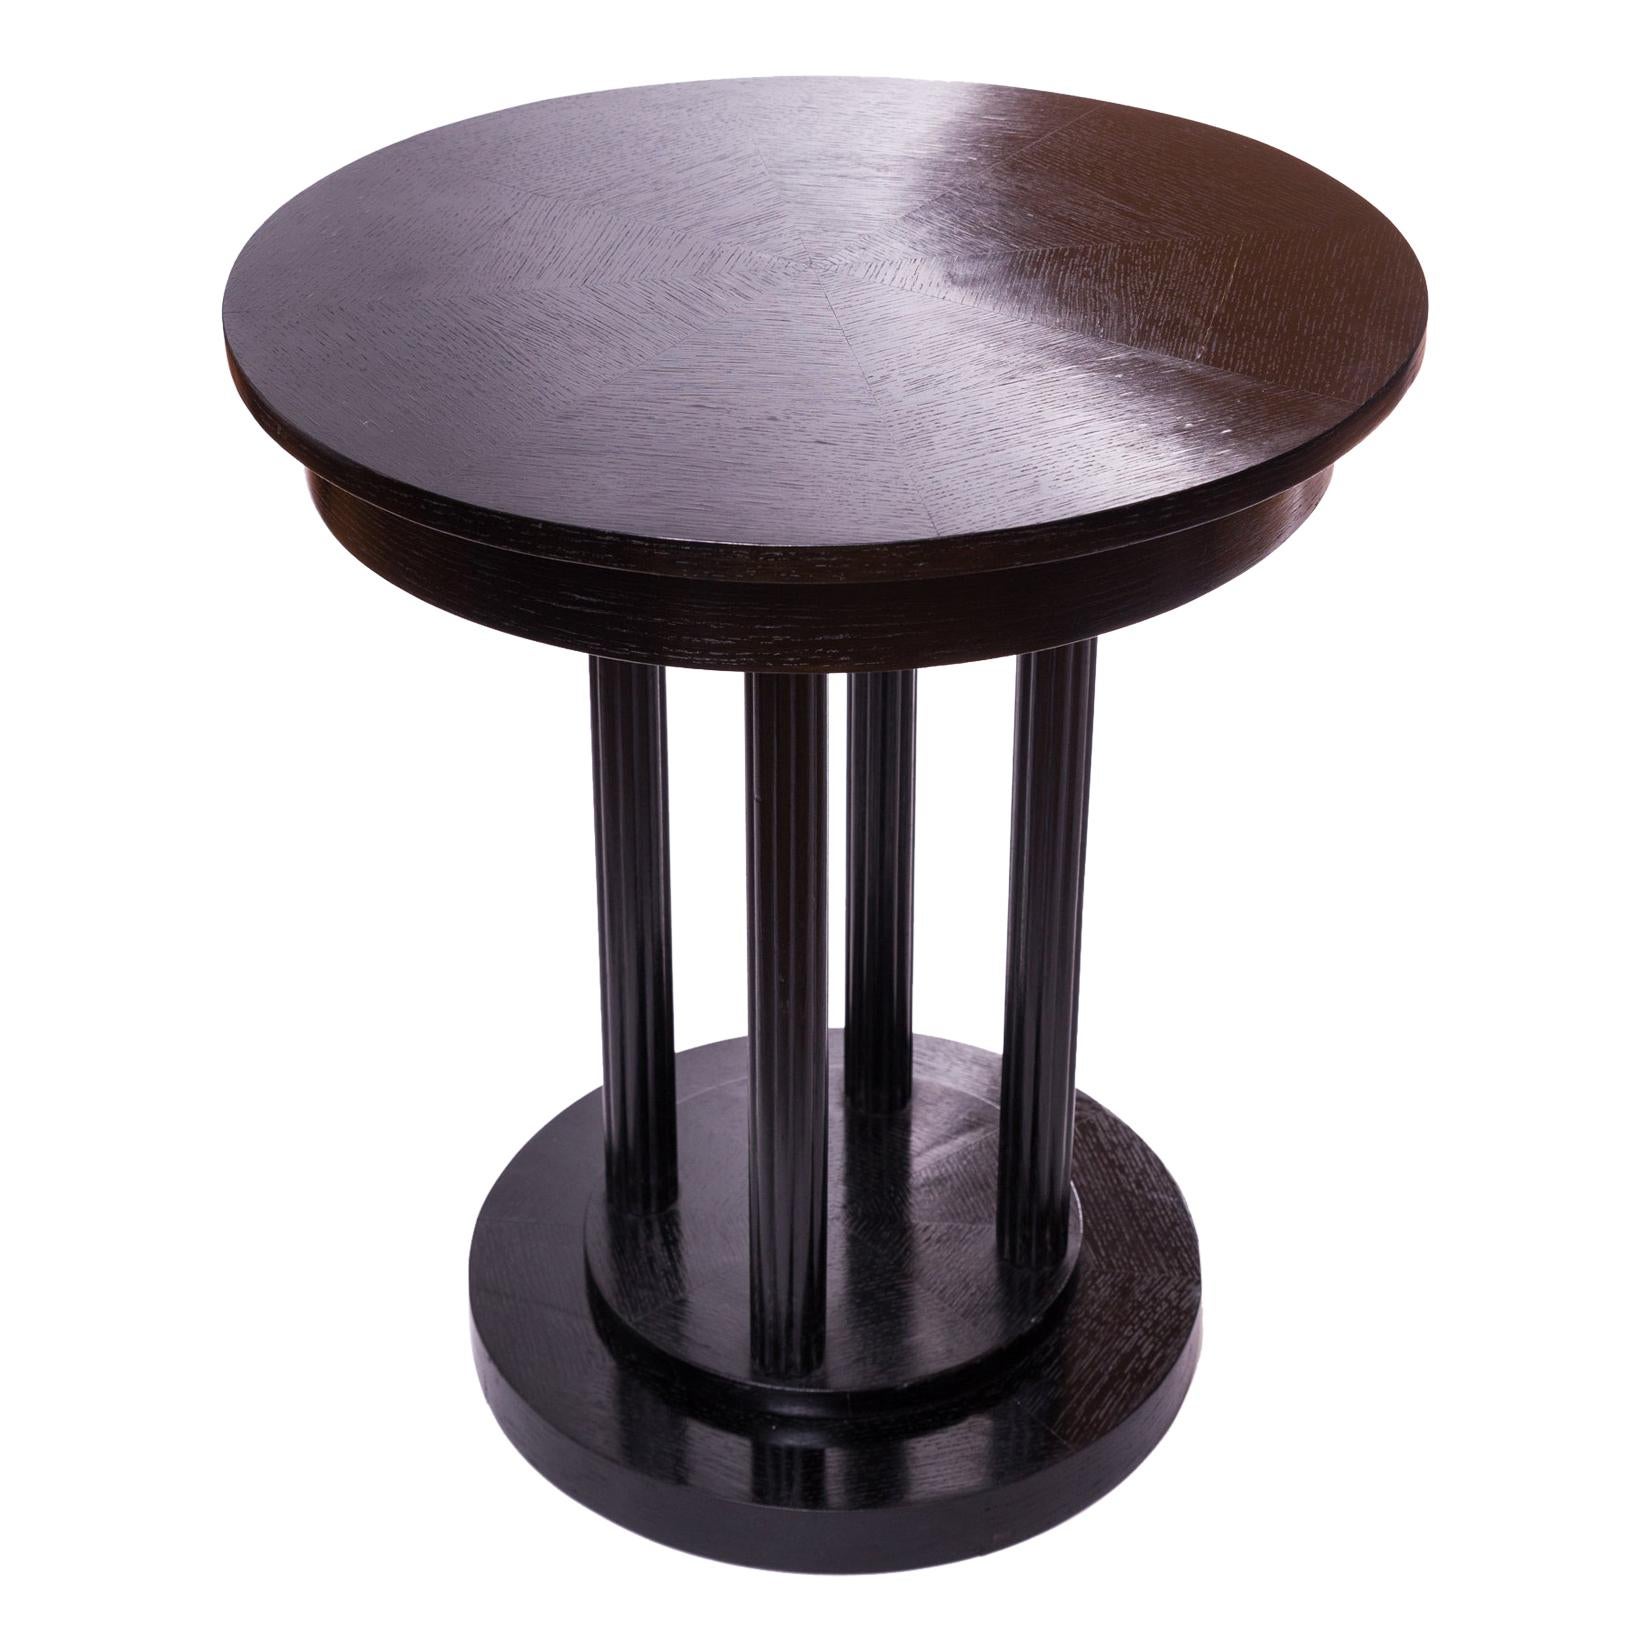 Art Deco Black Table, Viennese Thonet Style, circa 1910-20, Varnished wood For Sale